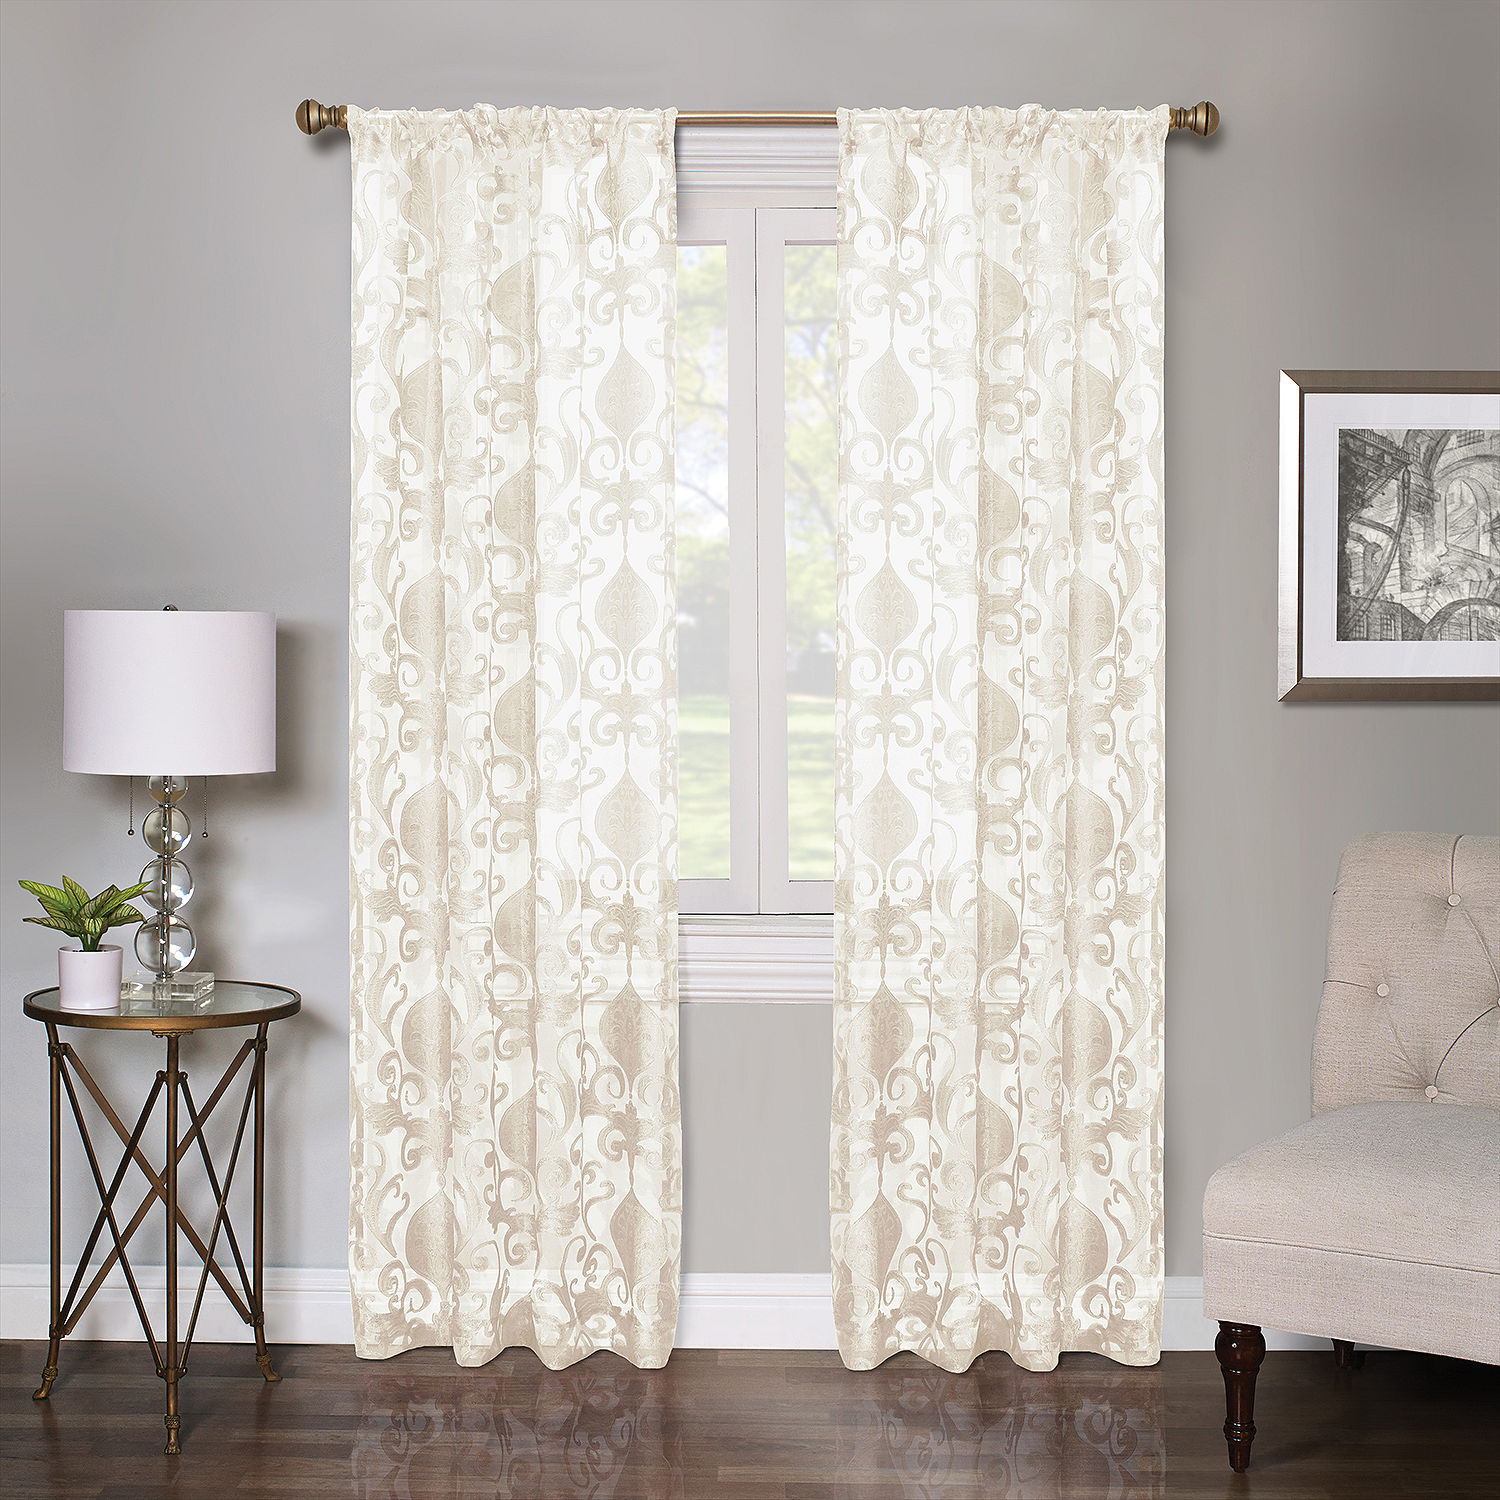 Regal Home Lombardi Floral Sheer Rod Pocket Single Curtain Panel - JCPenney